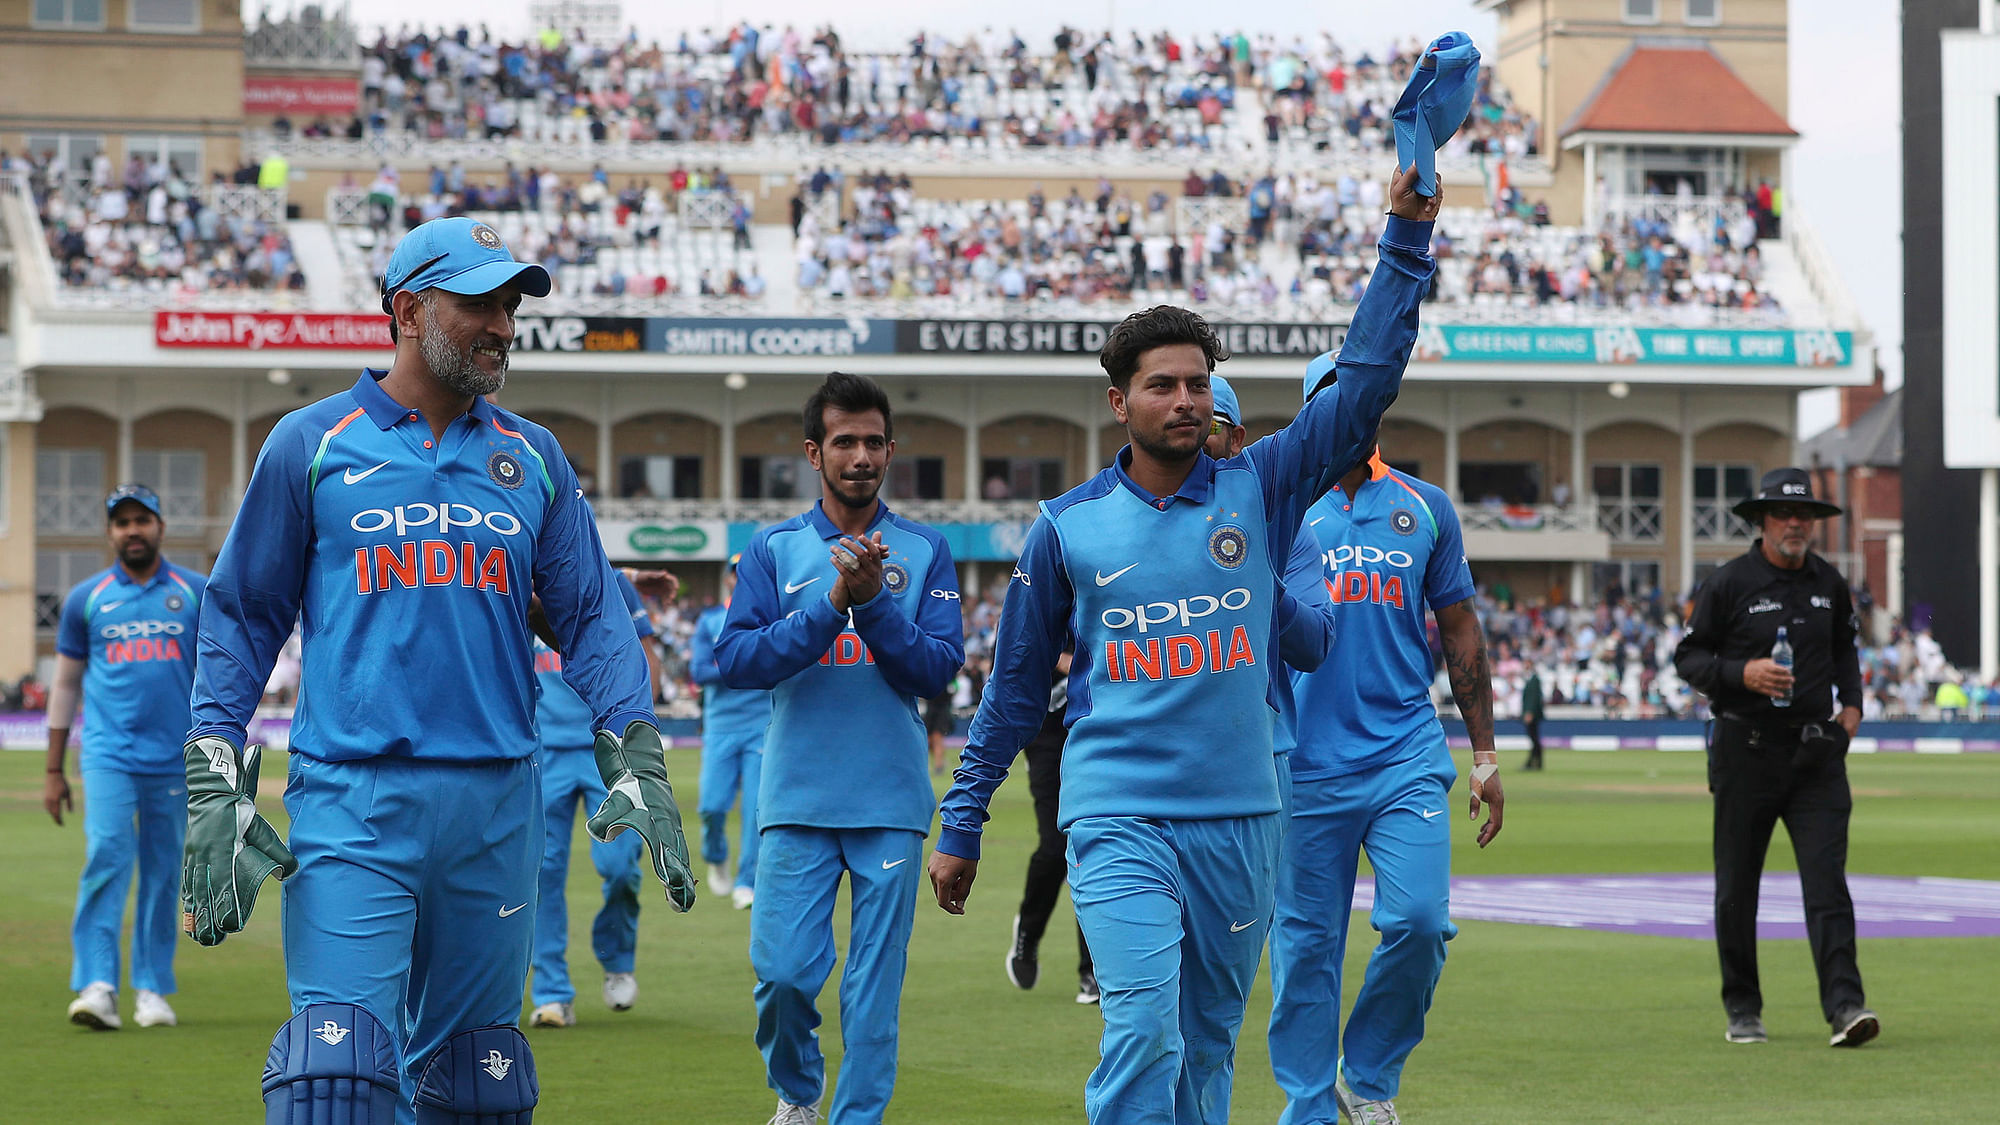 Kuldeep Yadav leads the Indian team off the field after finishing with a haul of 6/2 against England.